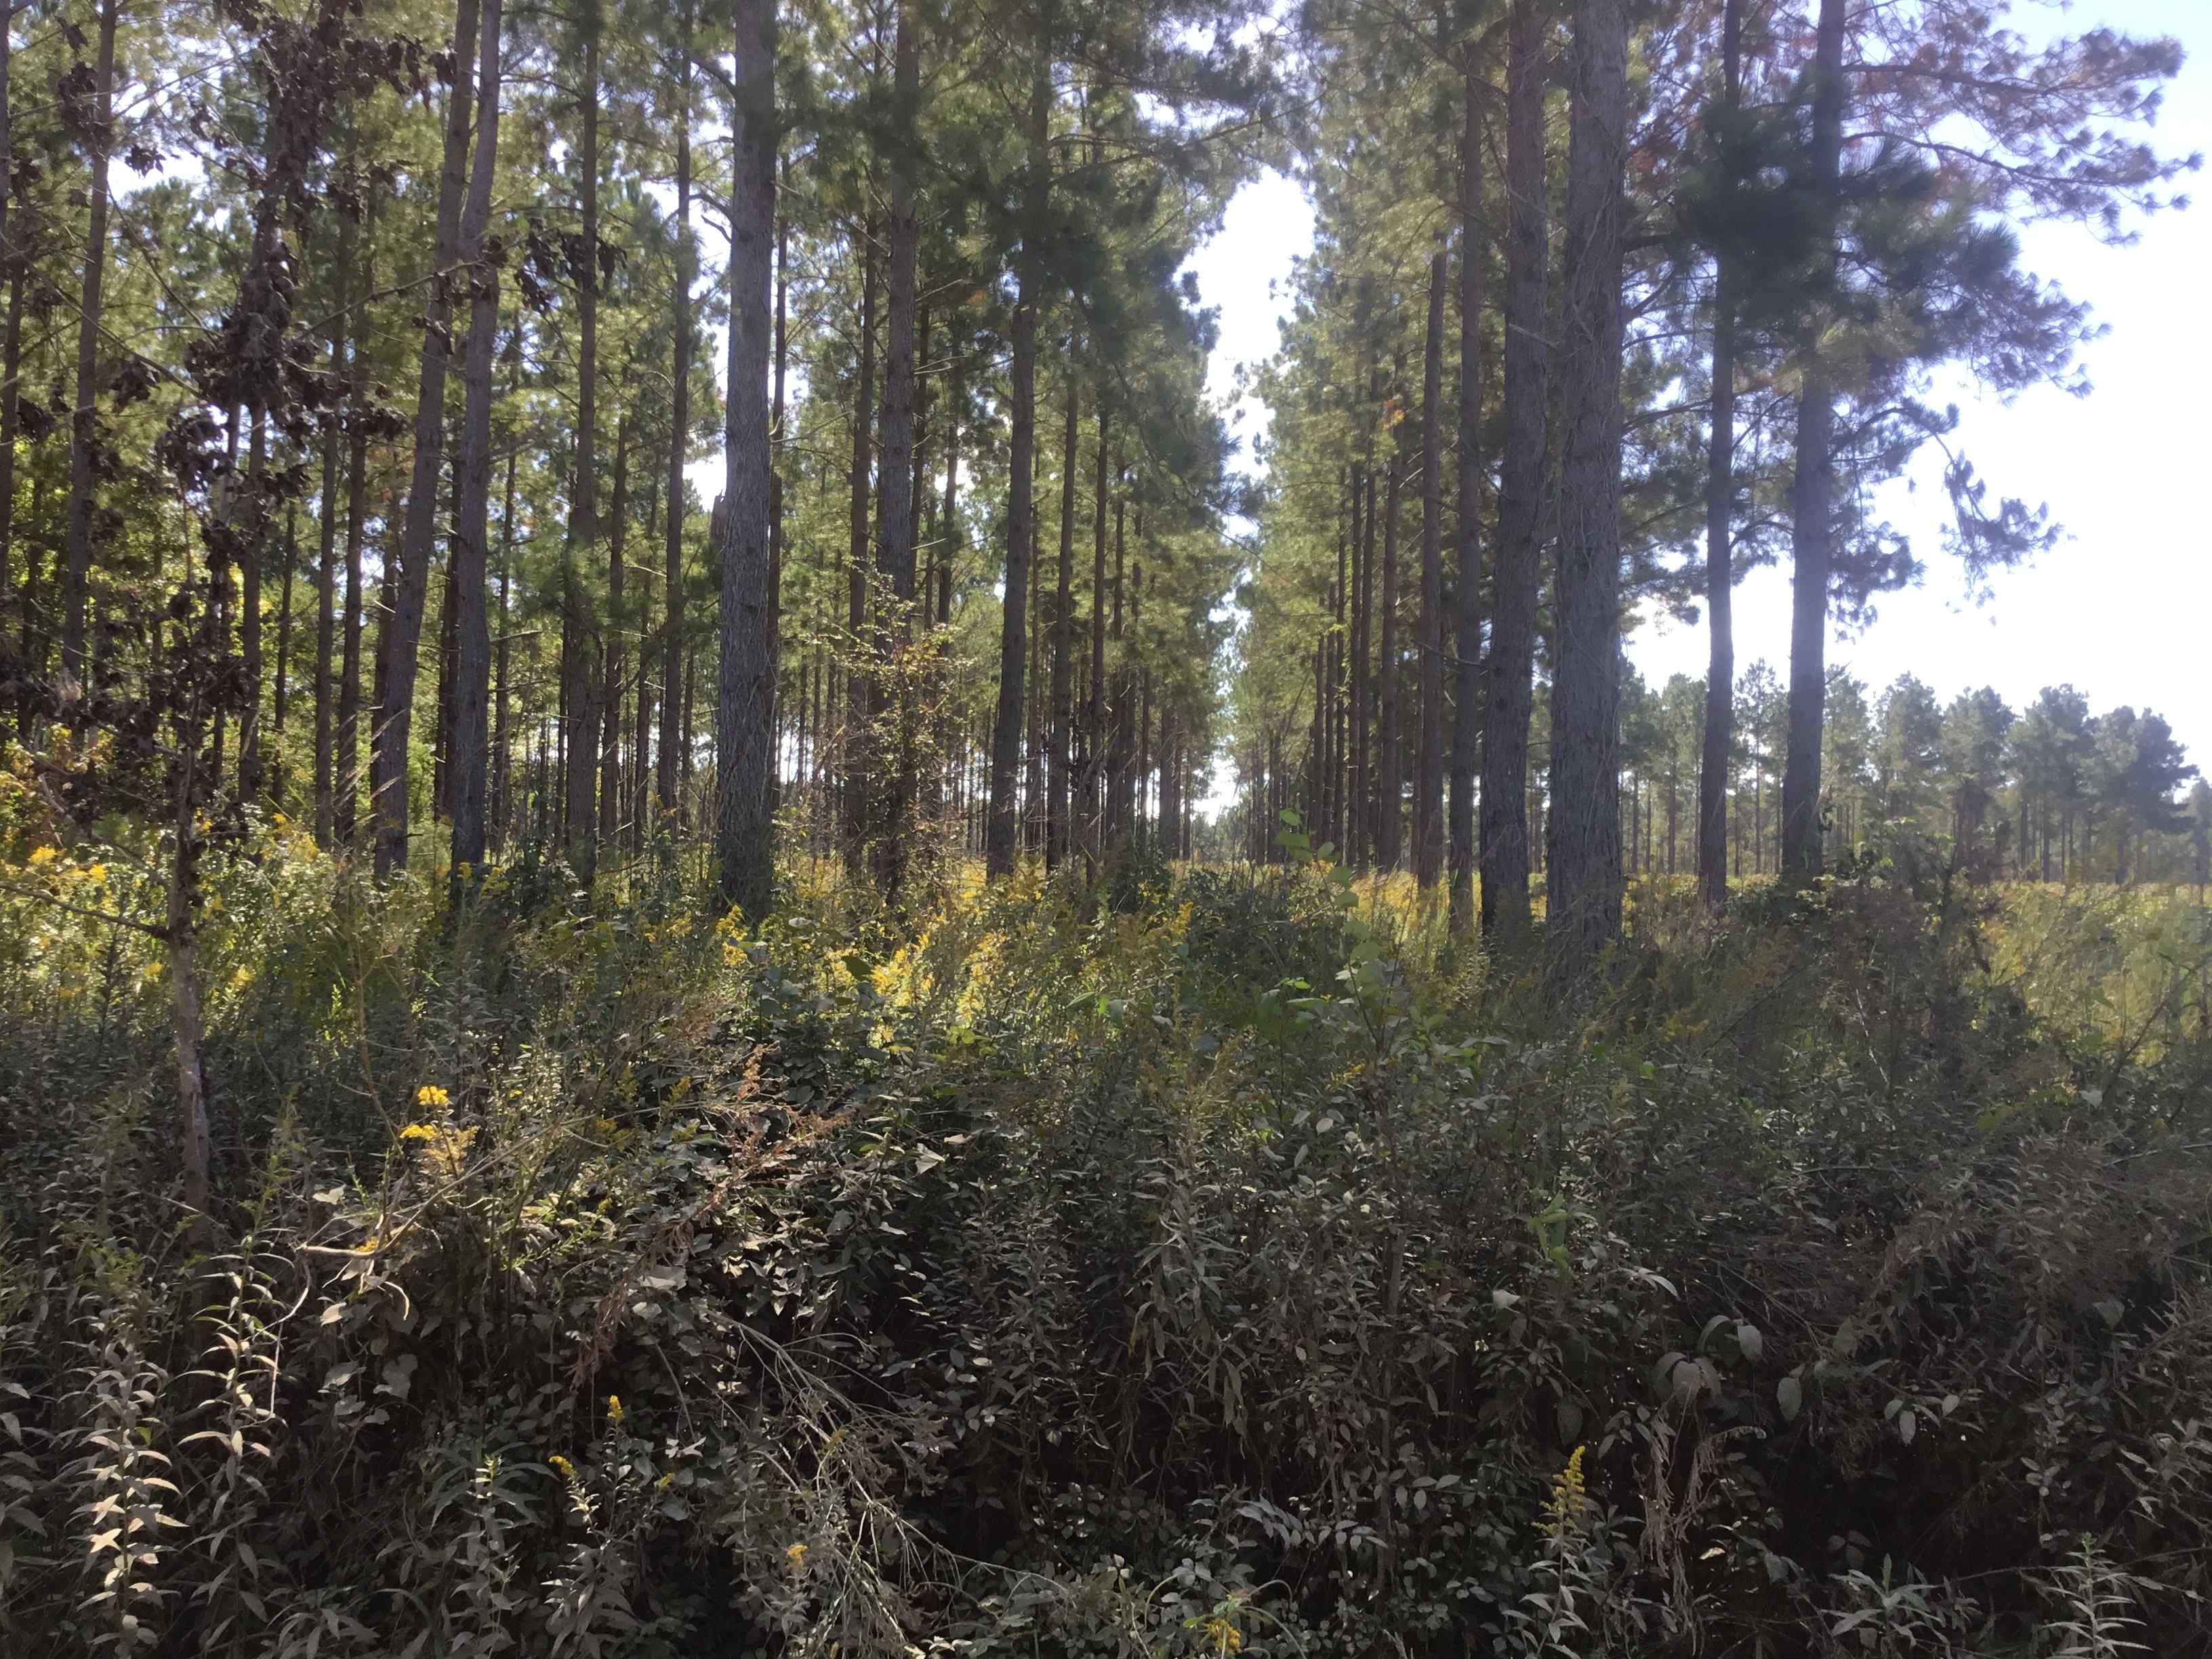 Advance Land and Timber Land for sale property_imgs/217-1-5115341.jpg